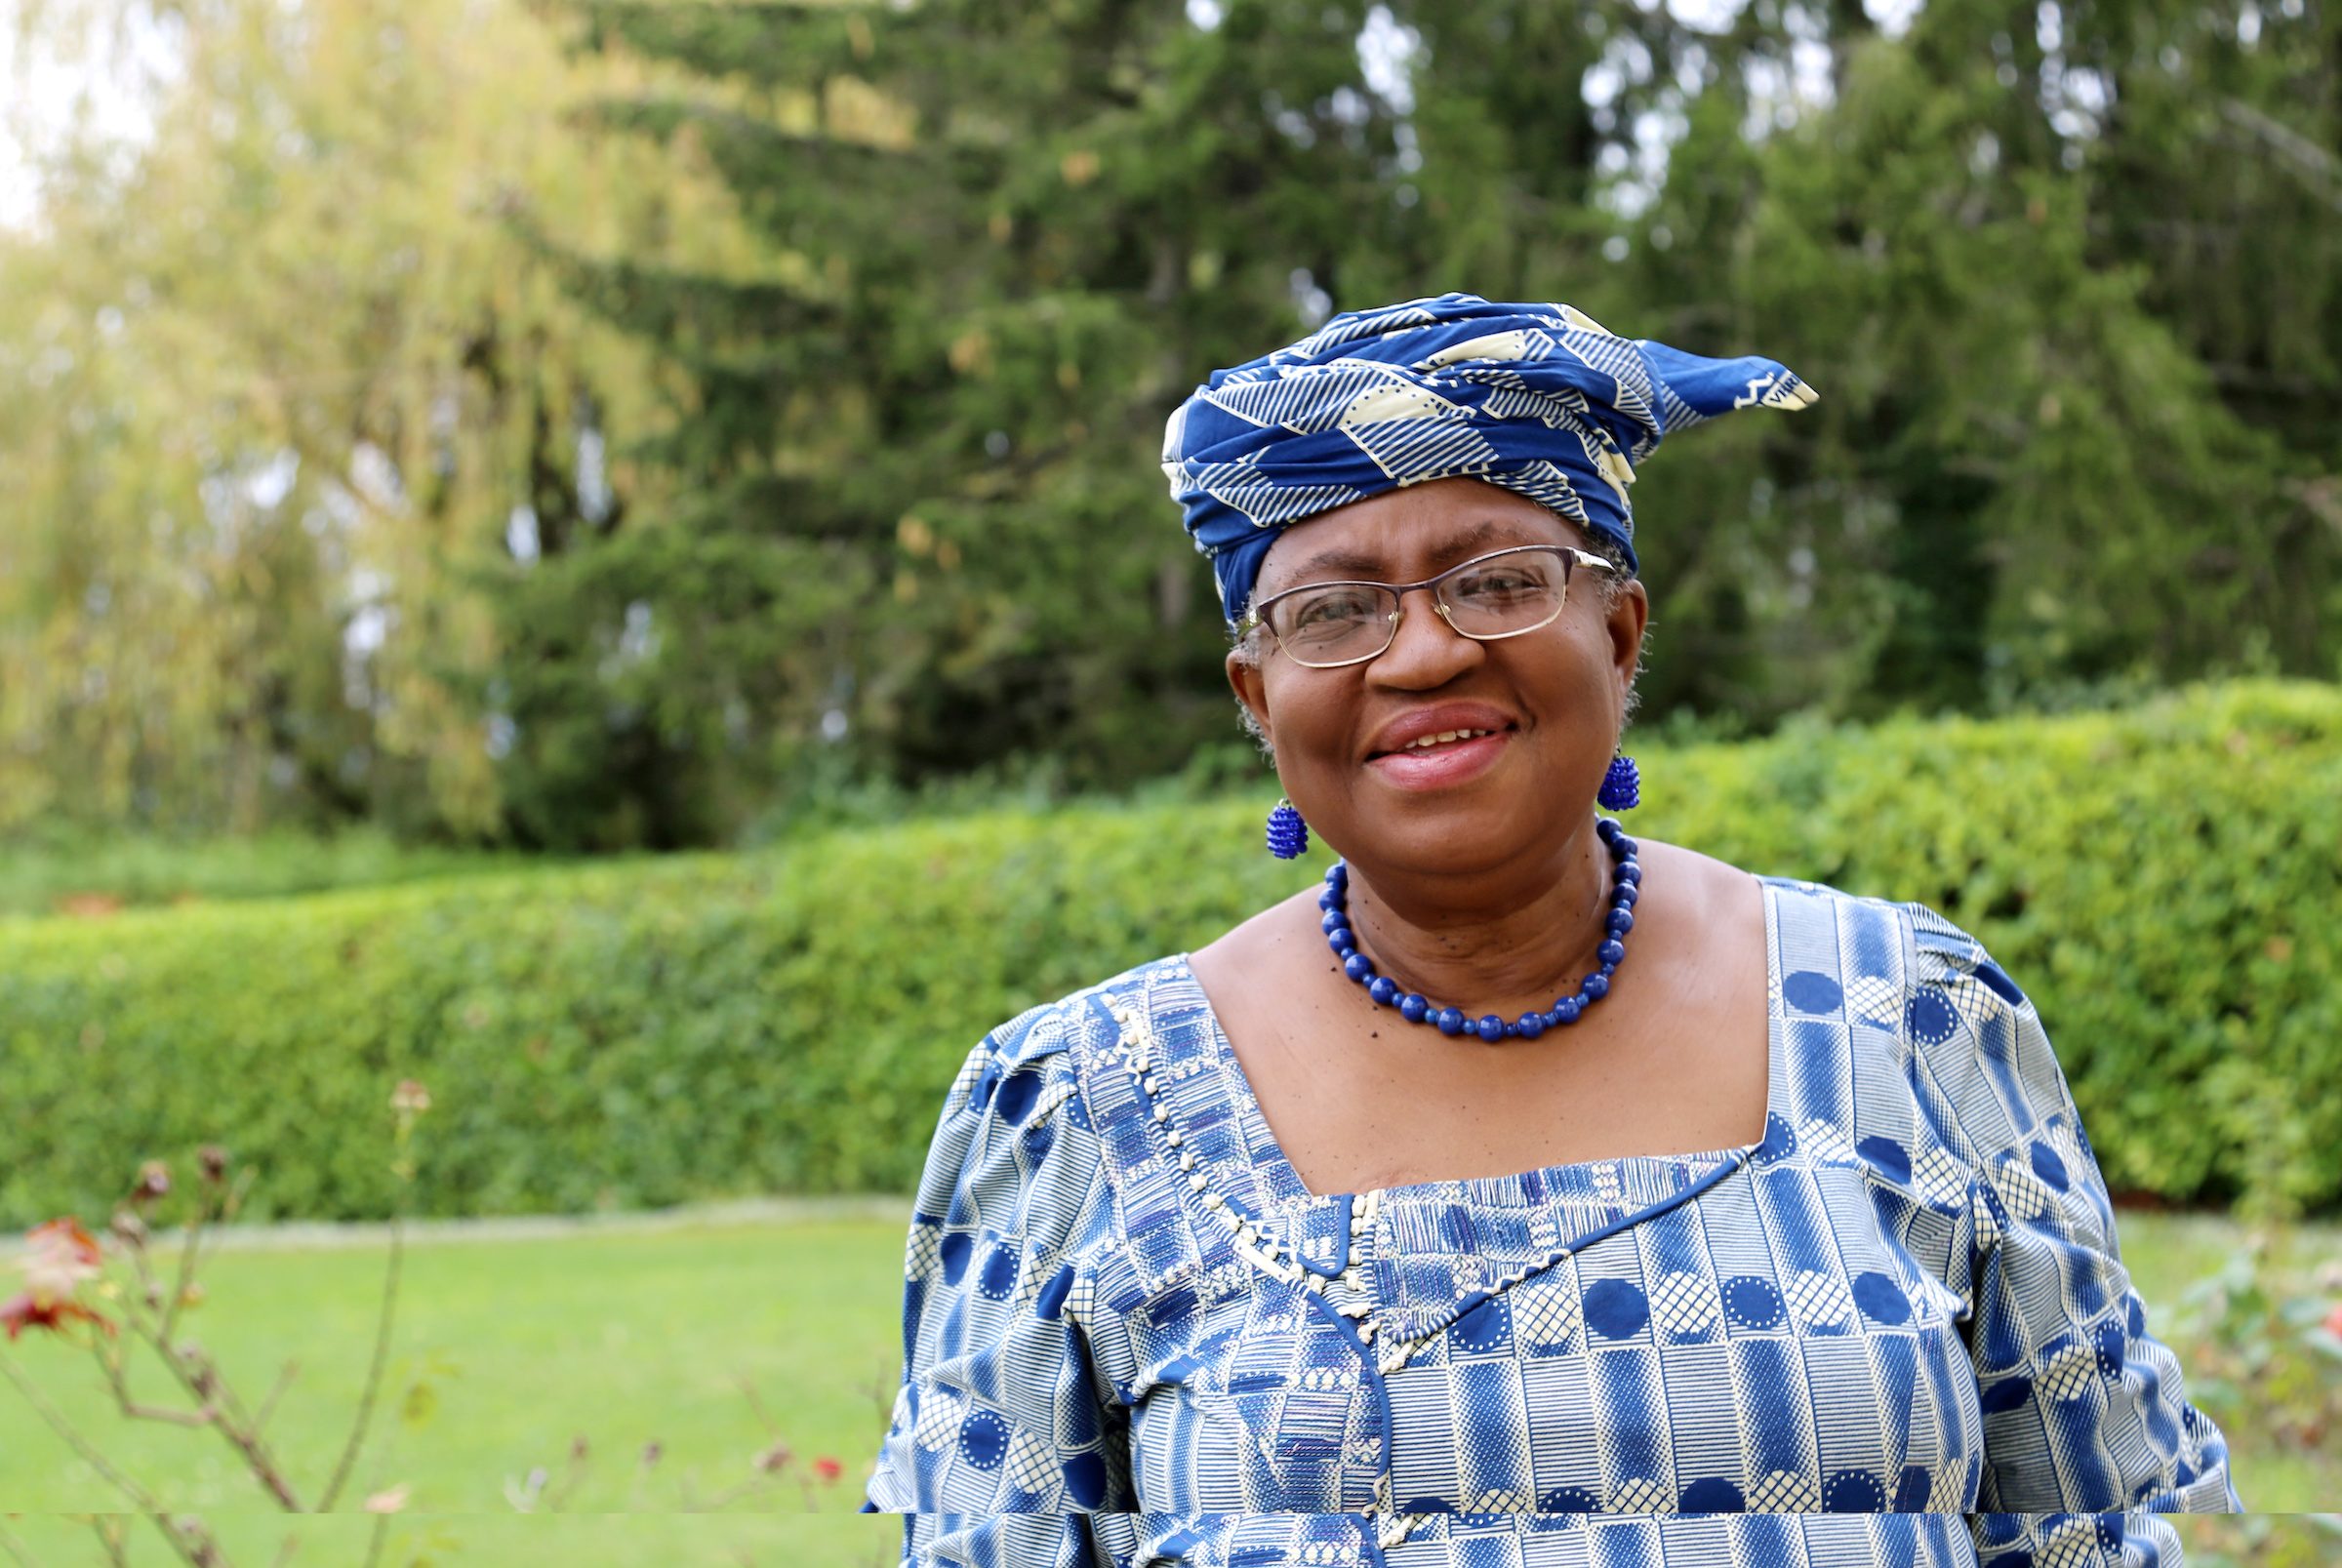 Nigerian woman poised to lead WTO after rival withdraws, US offers support